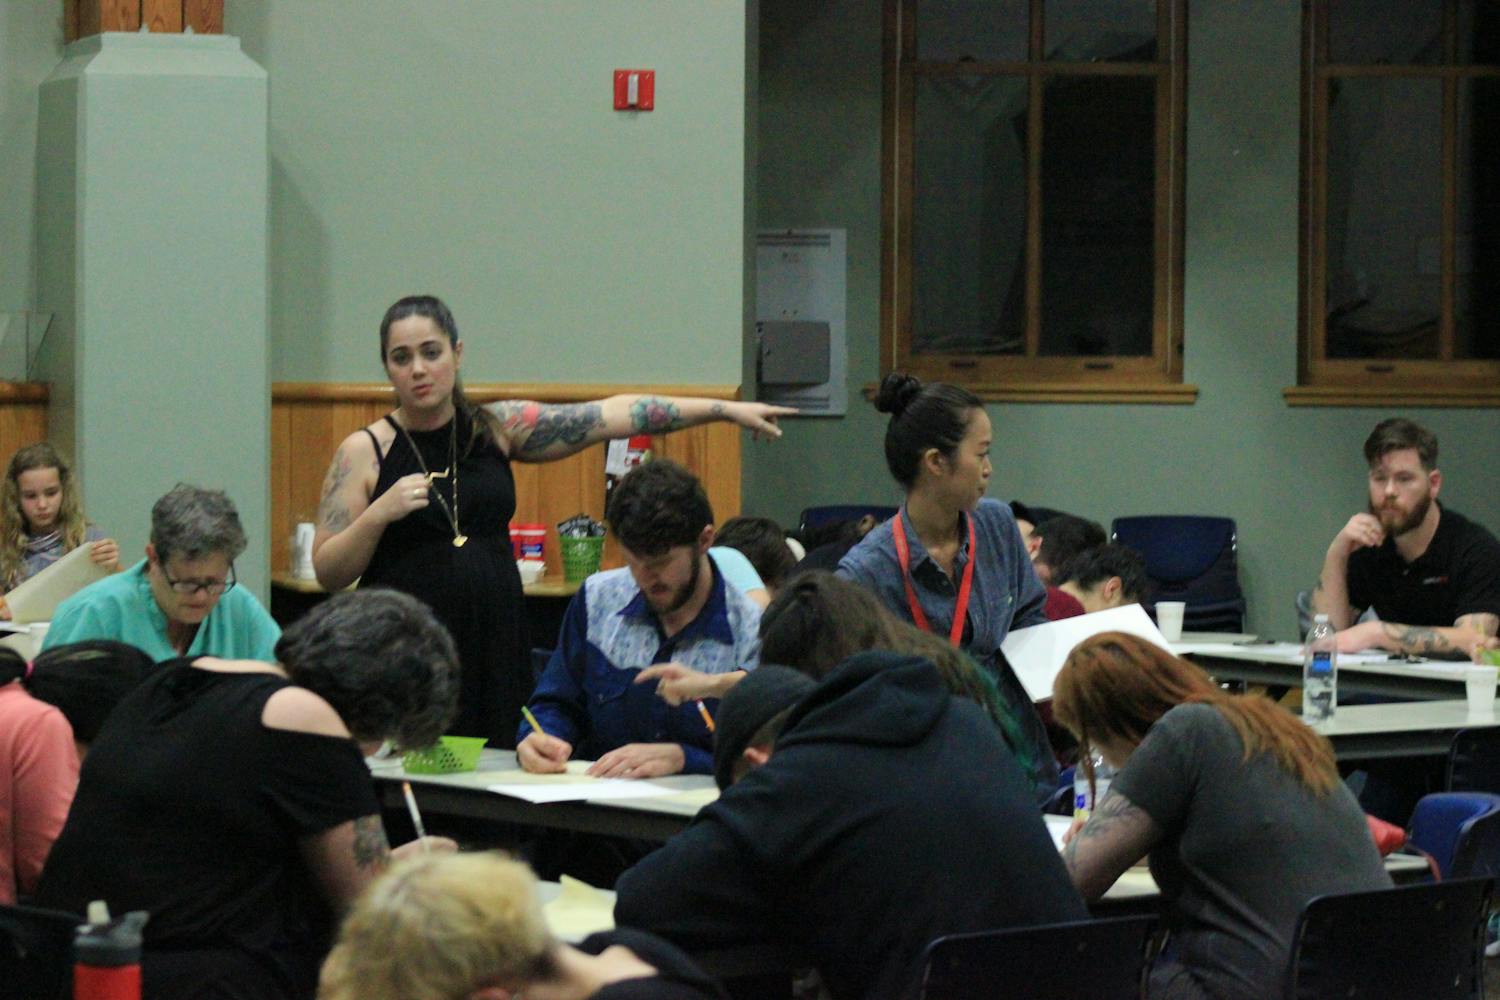 Standing to the left, Kristyn "Bat" Lopez, a tattooist for Death or Glory Tattoo, directs her Thursday night flash-tattoo workshop class at Alachua County Public Library's Headquarters Branch to drawing supplies.